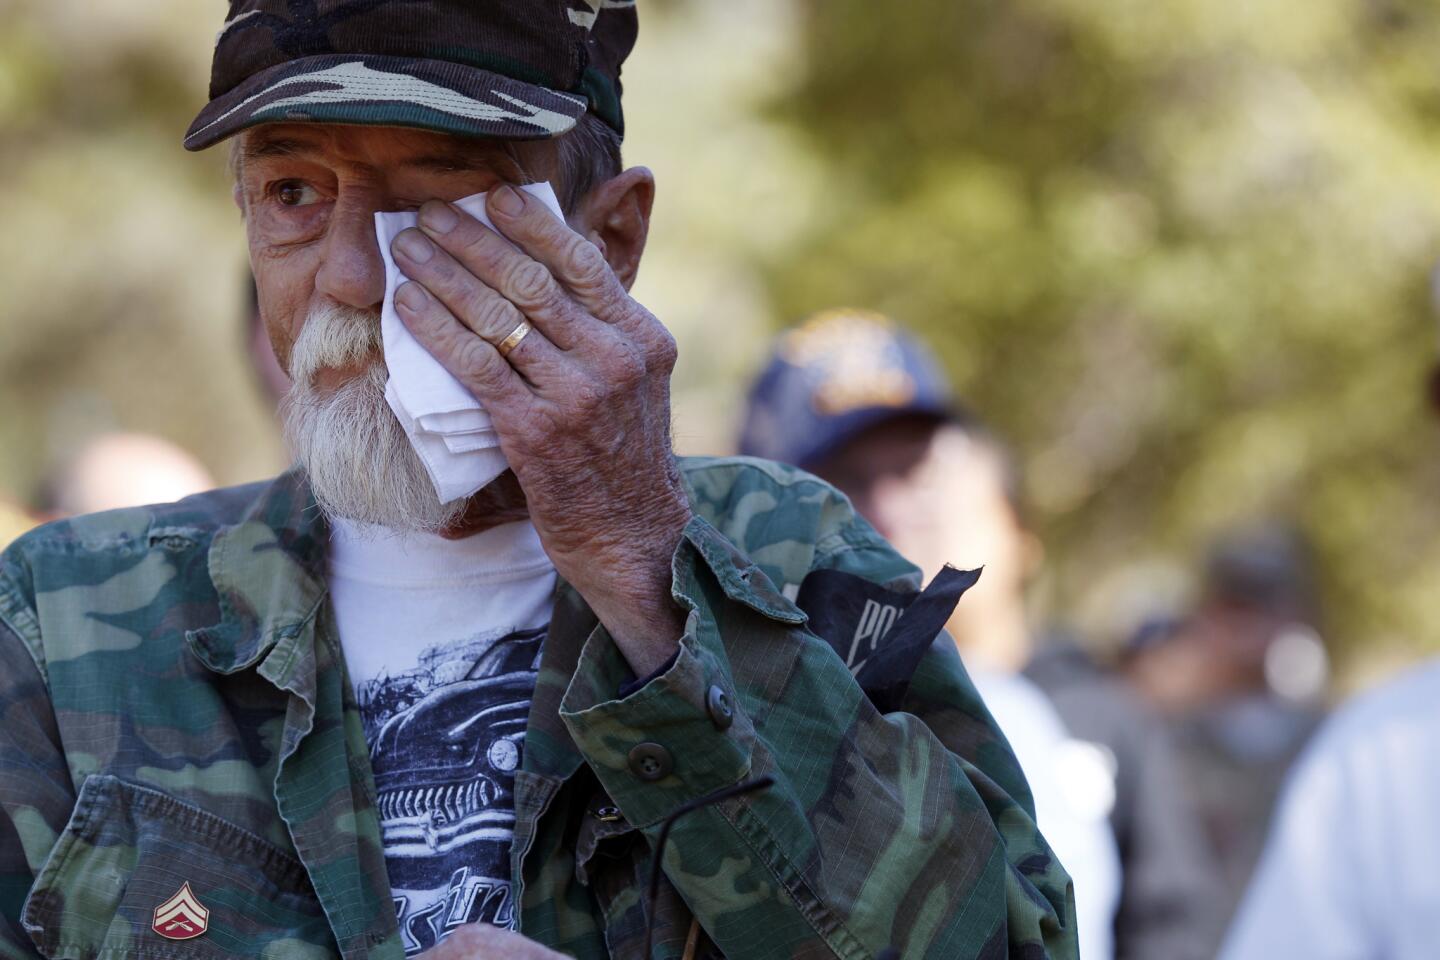 Mike Raczka, a USMC Vietnam veteran, wipes tears during recognition of POW/MIAs during Veterans Day ceremony at Hillcrest Park in Fullerton.